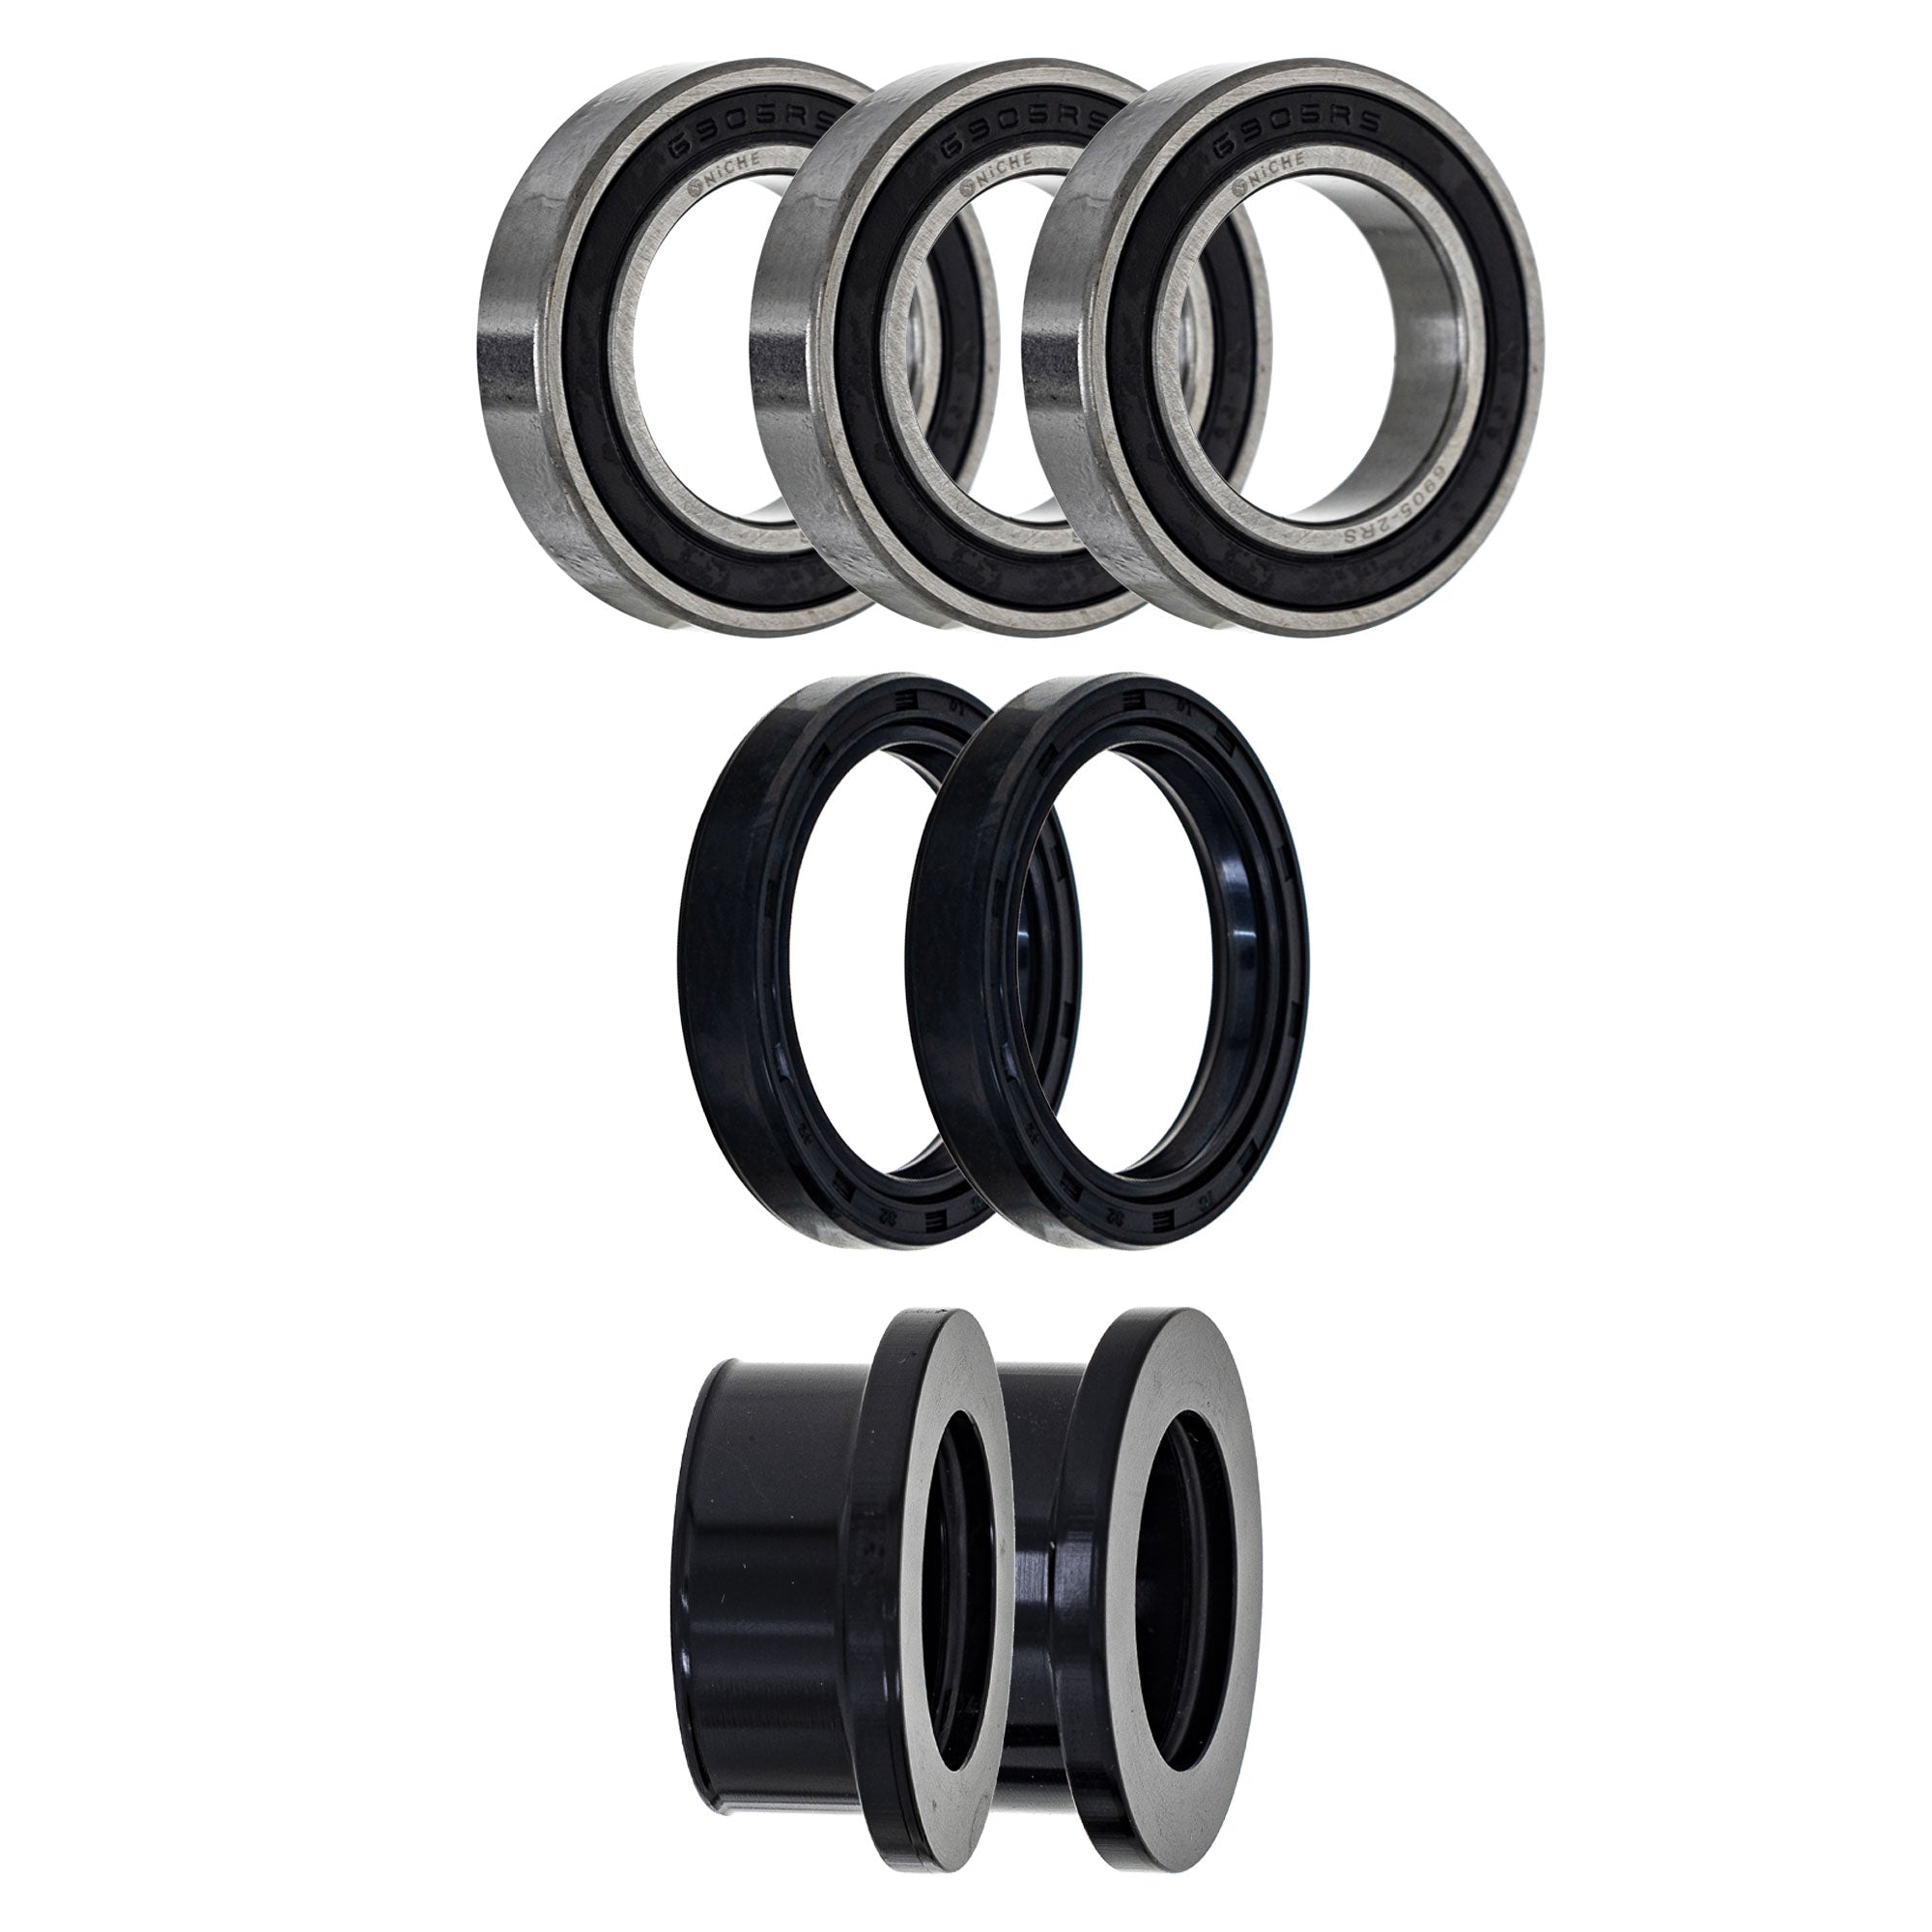 Wheel Bearing Spacer Seal Kit for zOTHER YZ450F YZ250FX YZ250F TC85 NICHE MK1009222